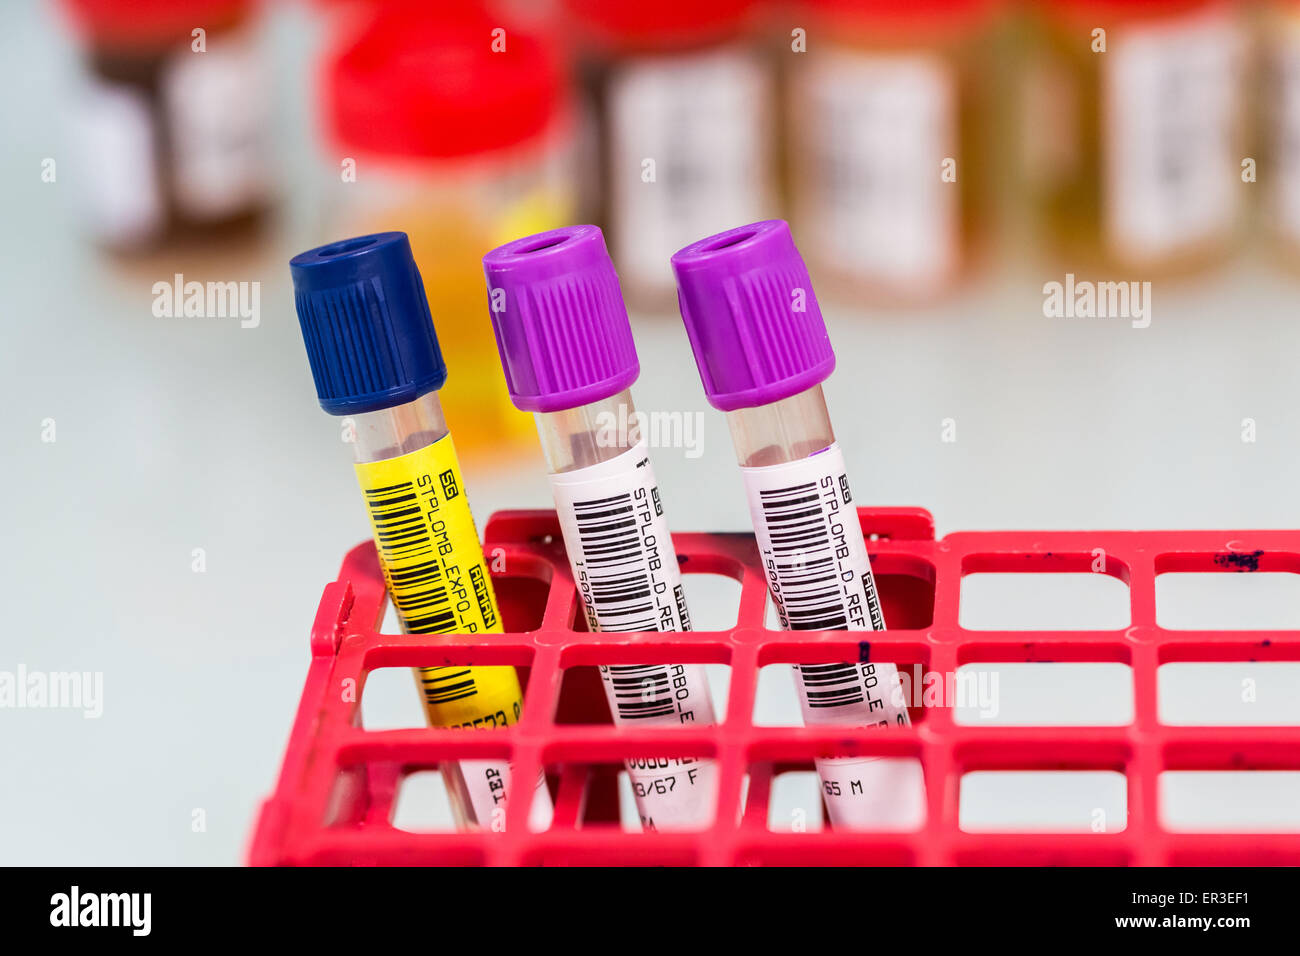 Analysis of lead in the blood (lead poisoning). Laboratory of Environmental Analytical Toxicology and Occupational Health. Biology and Research Center. Stock Photo